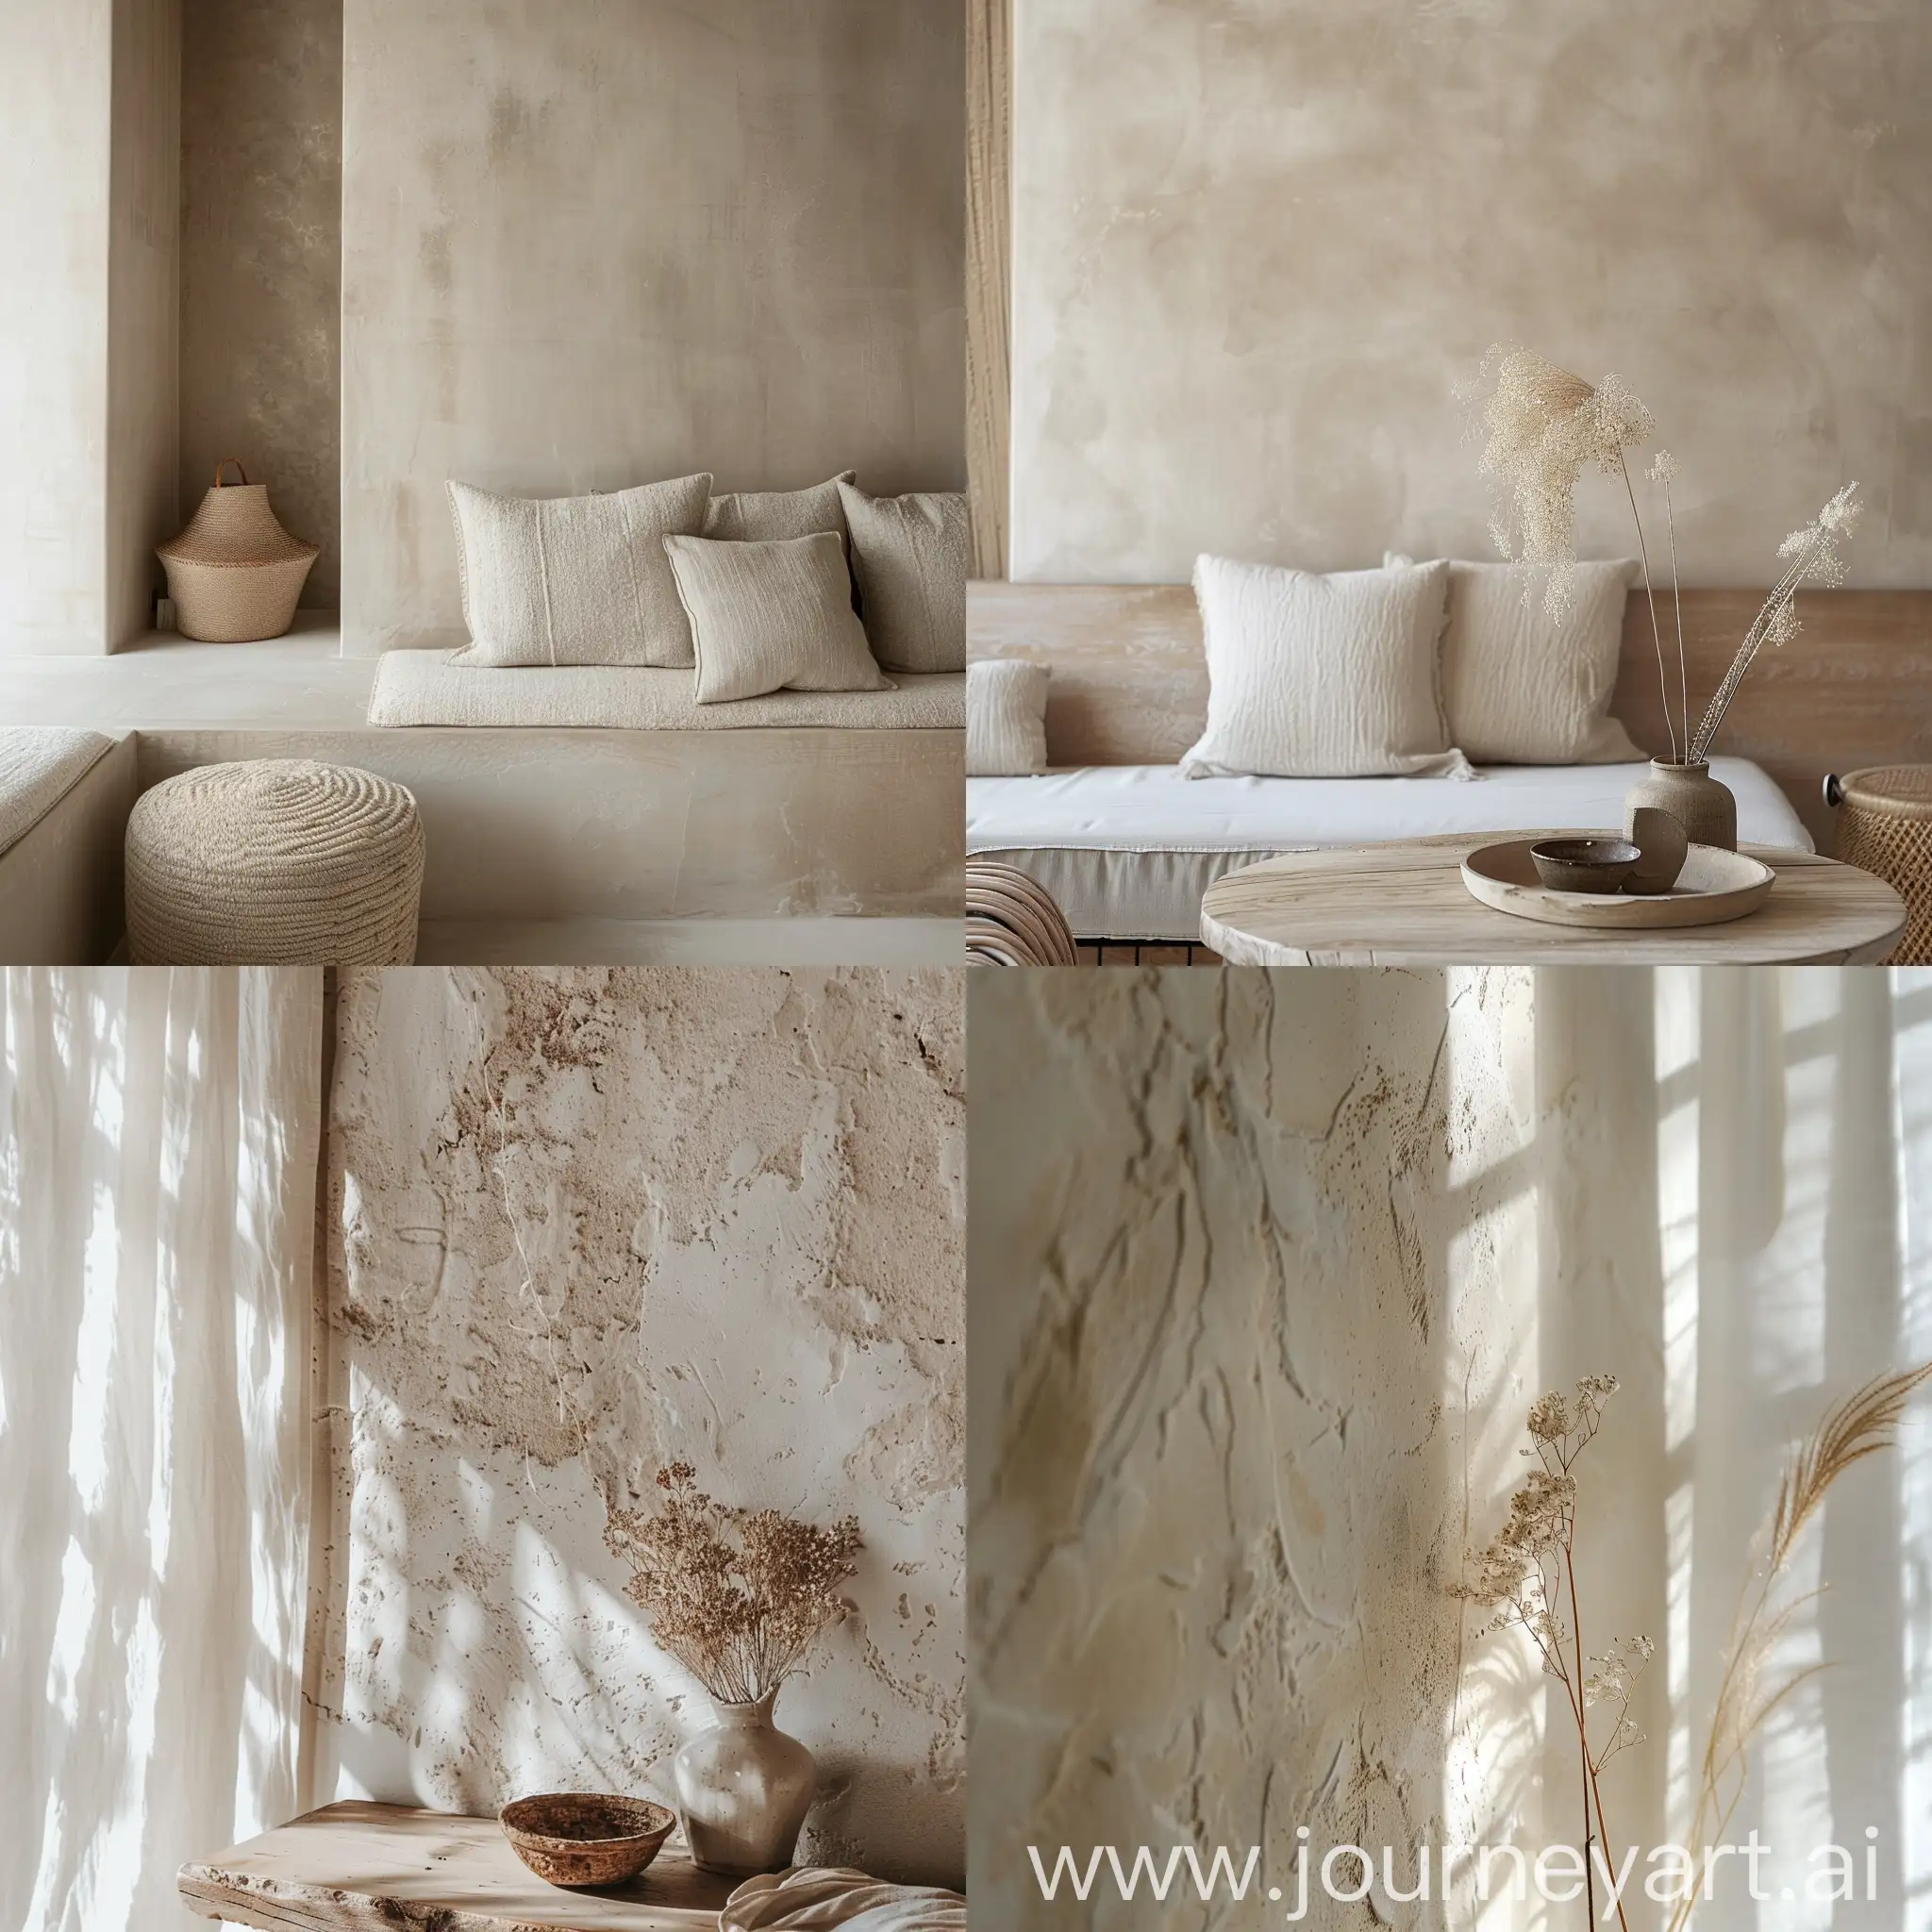 Tranquil-Aesthetic-Wall-in-Earthy-Tones-Serene-Beauty-Captured-in-a-CloseUp-Shot